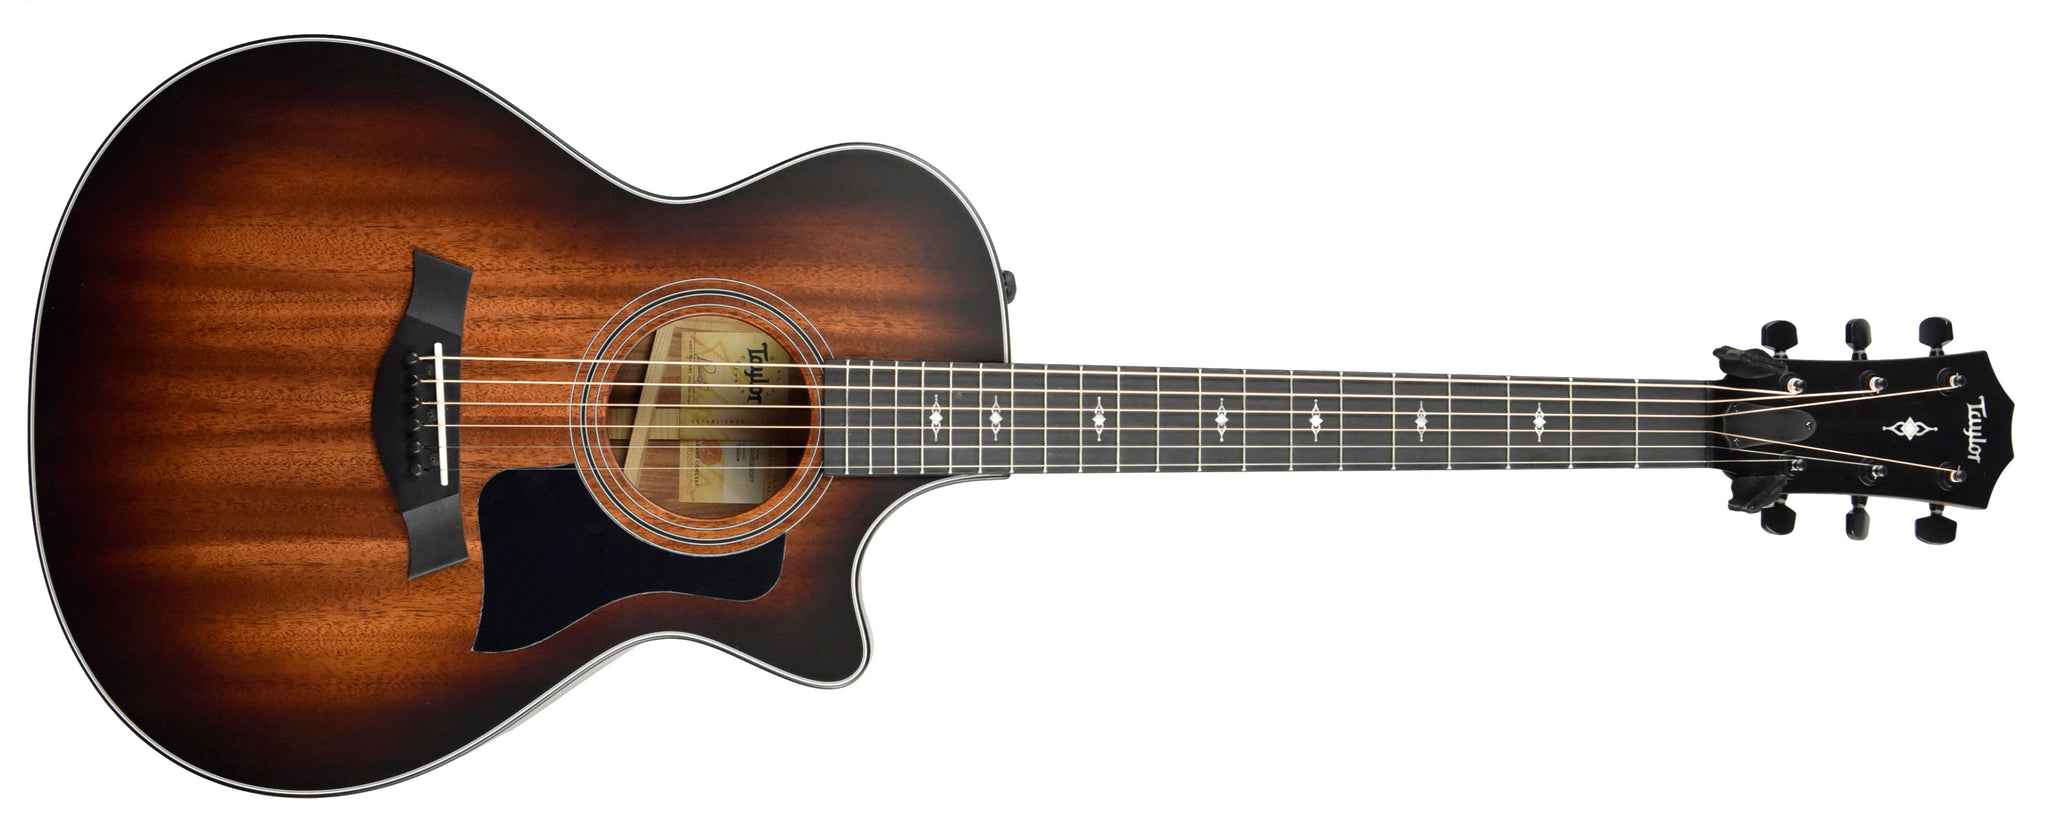 Taylor 322ce Acoustic-Electric Guitar in Shaded Edge Burst 